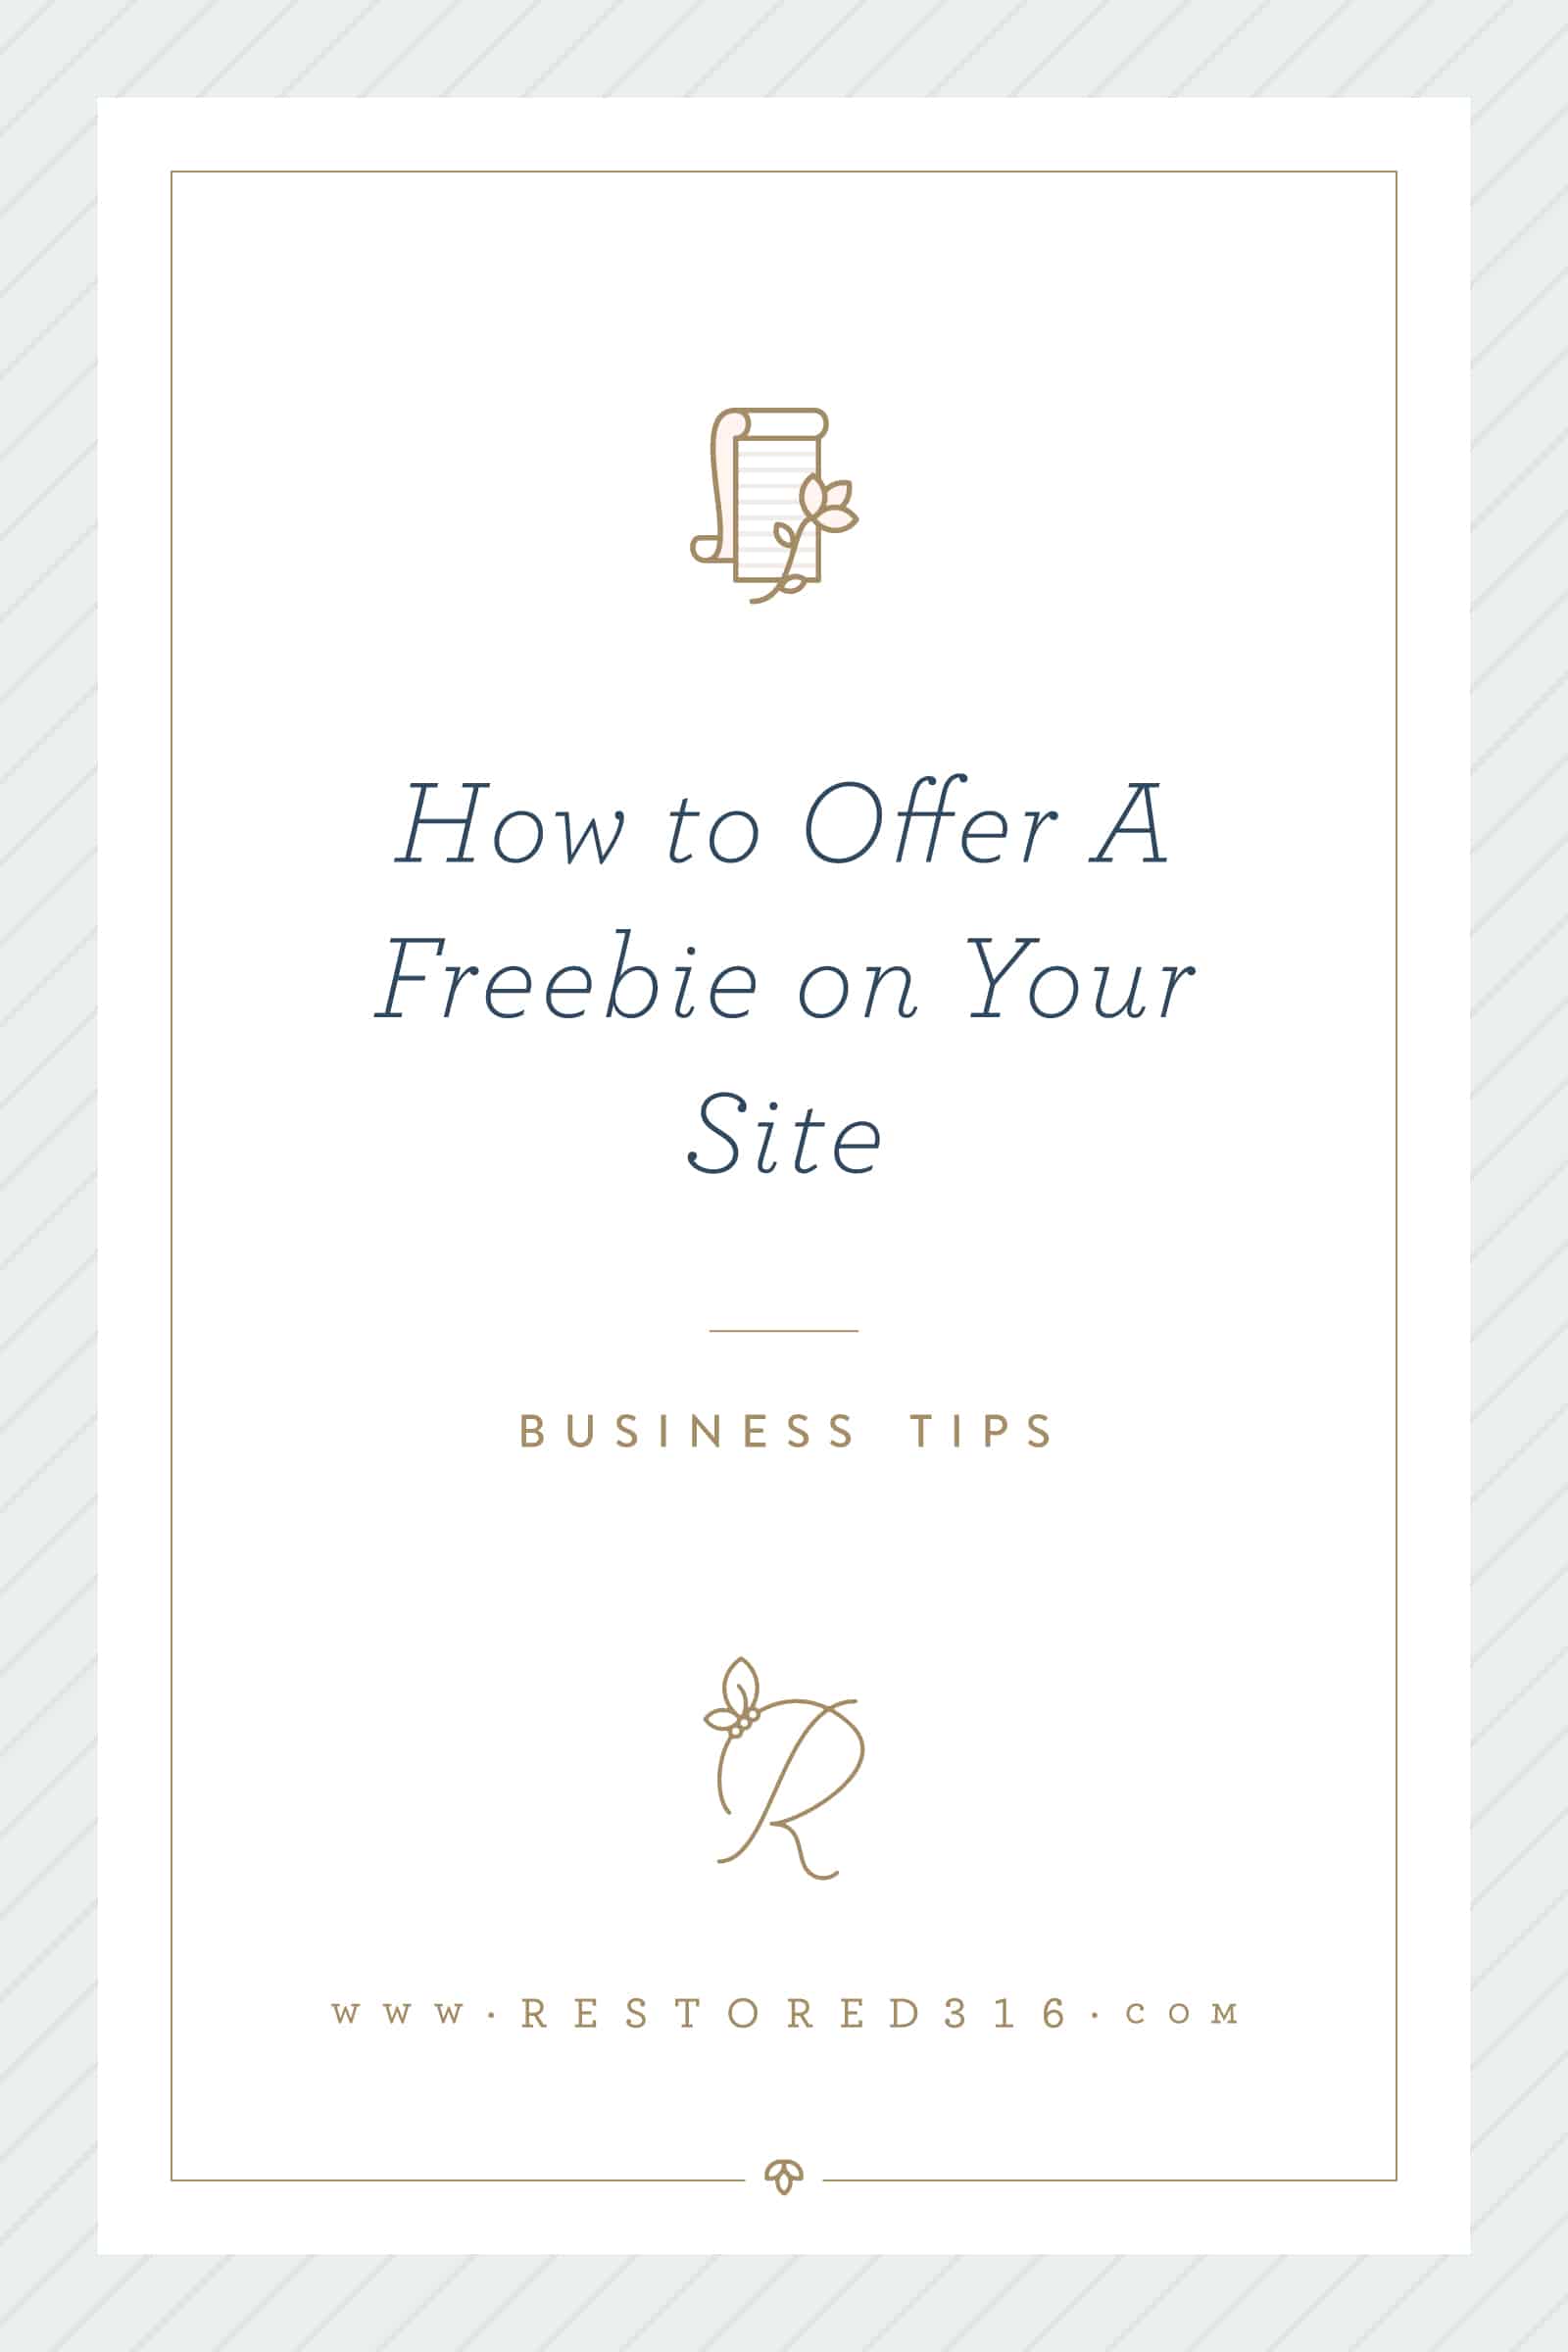 How to Offer A Freebie for Your Site